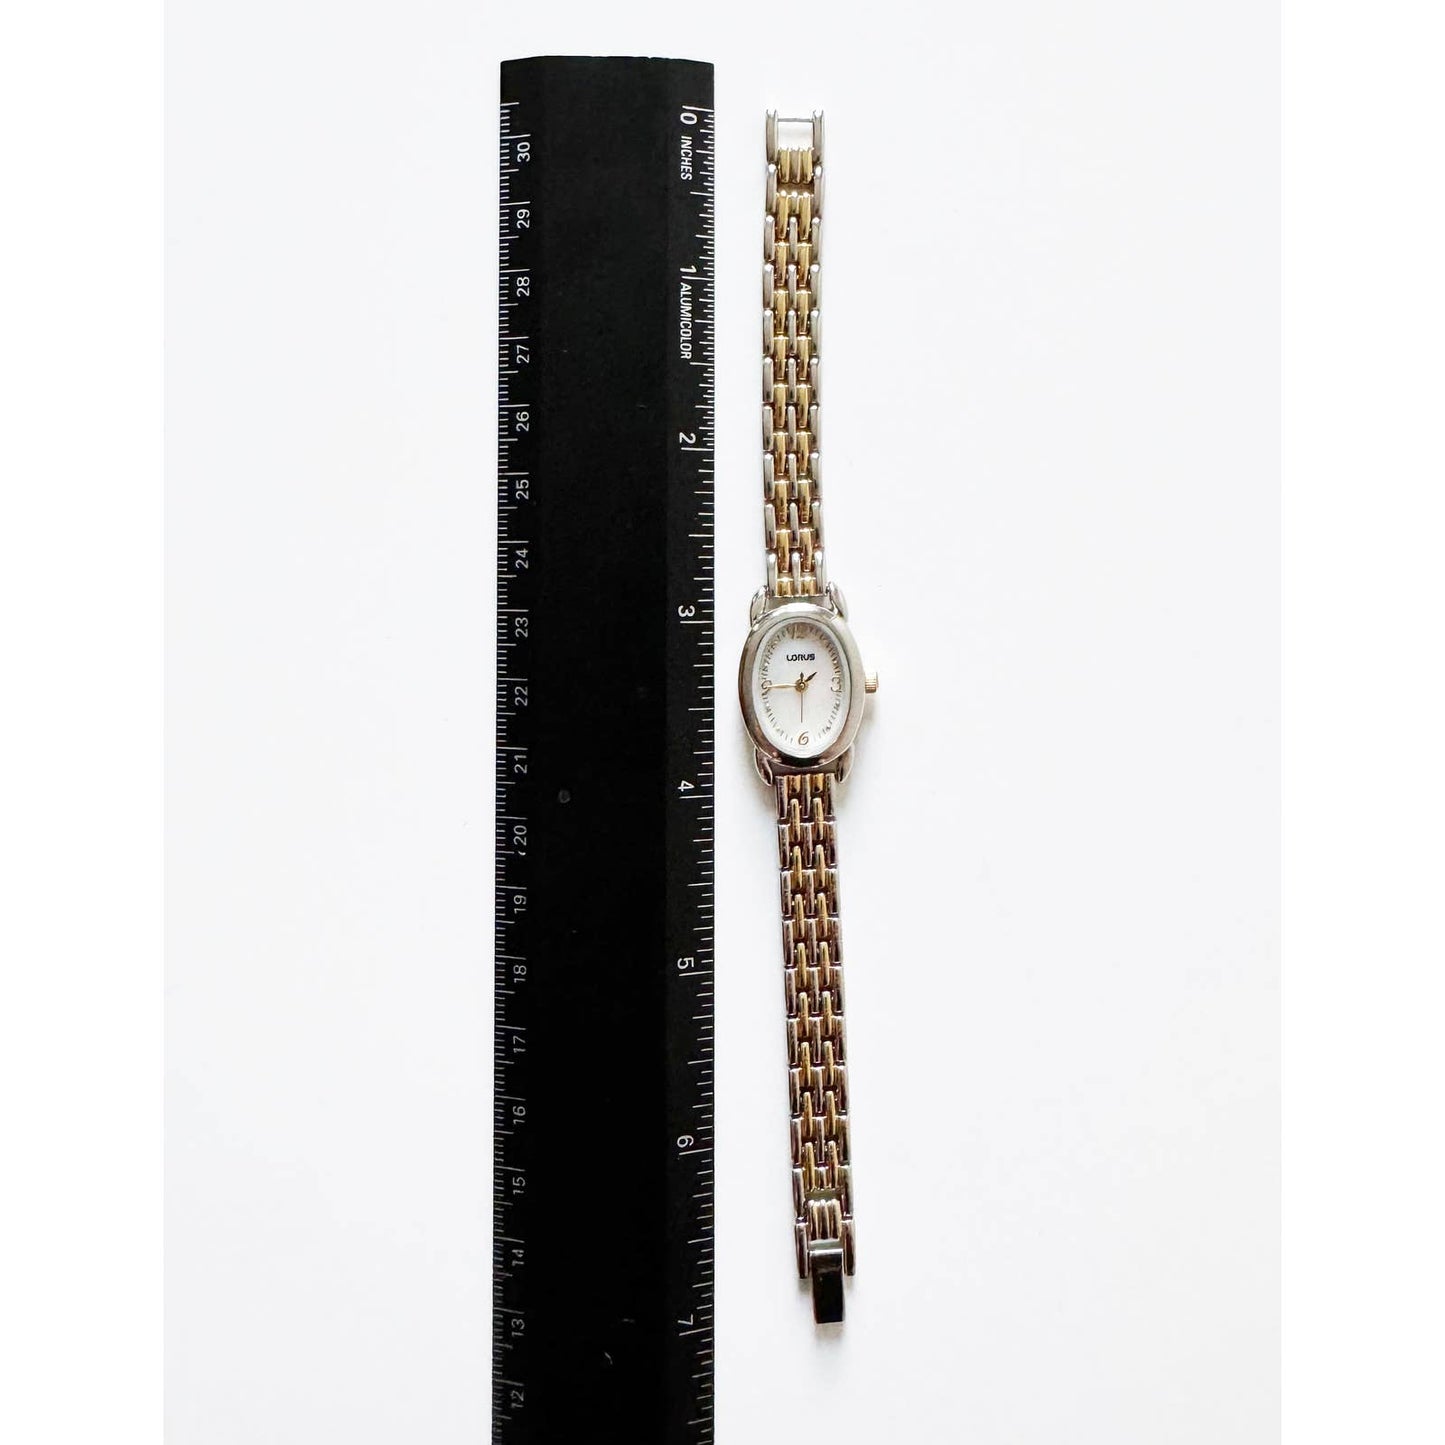 Vintage Two Tone Watch with Oval Face | Lorus